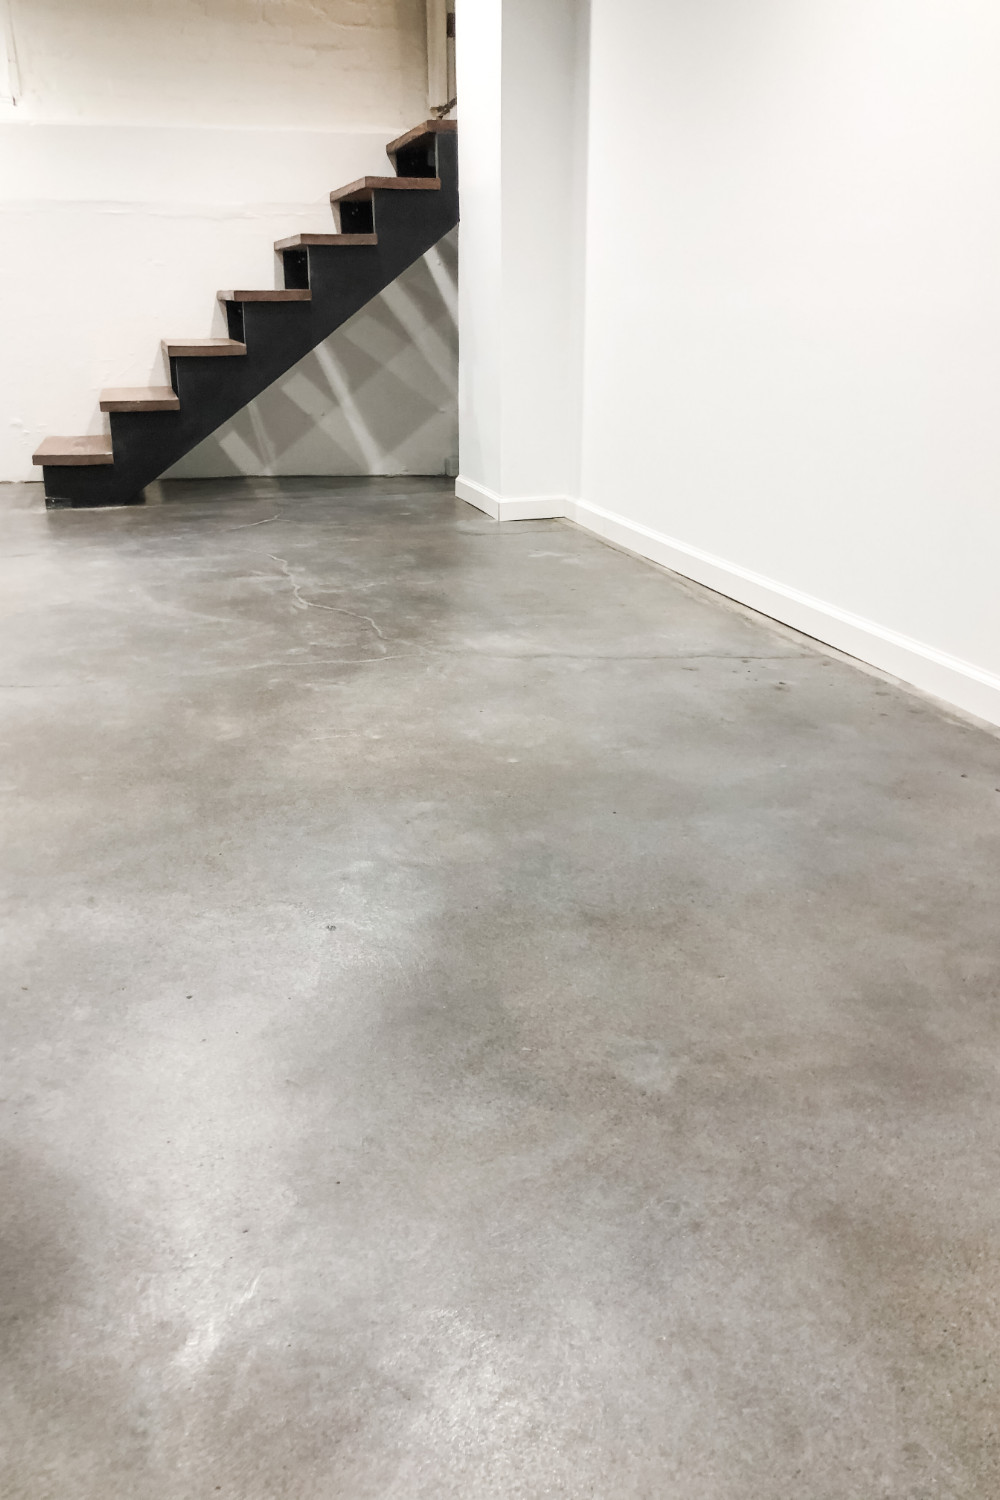 What Causes Gray Stains on Concrete Floors?